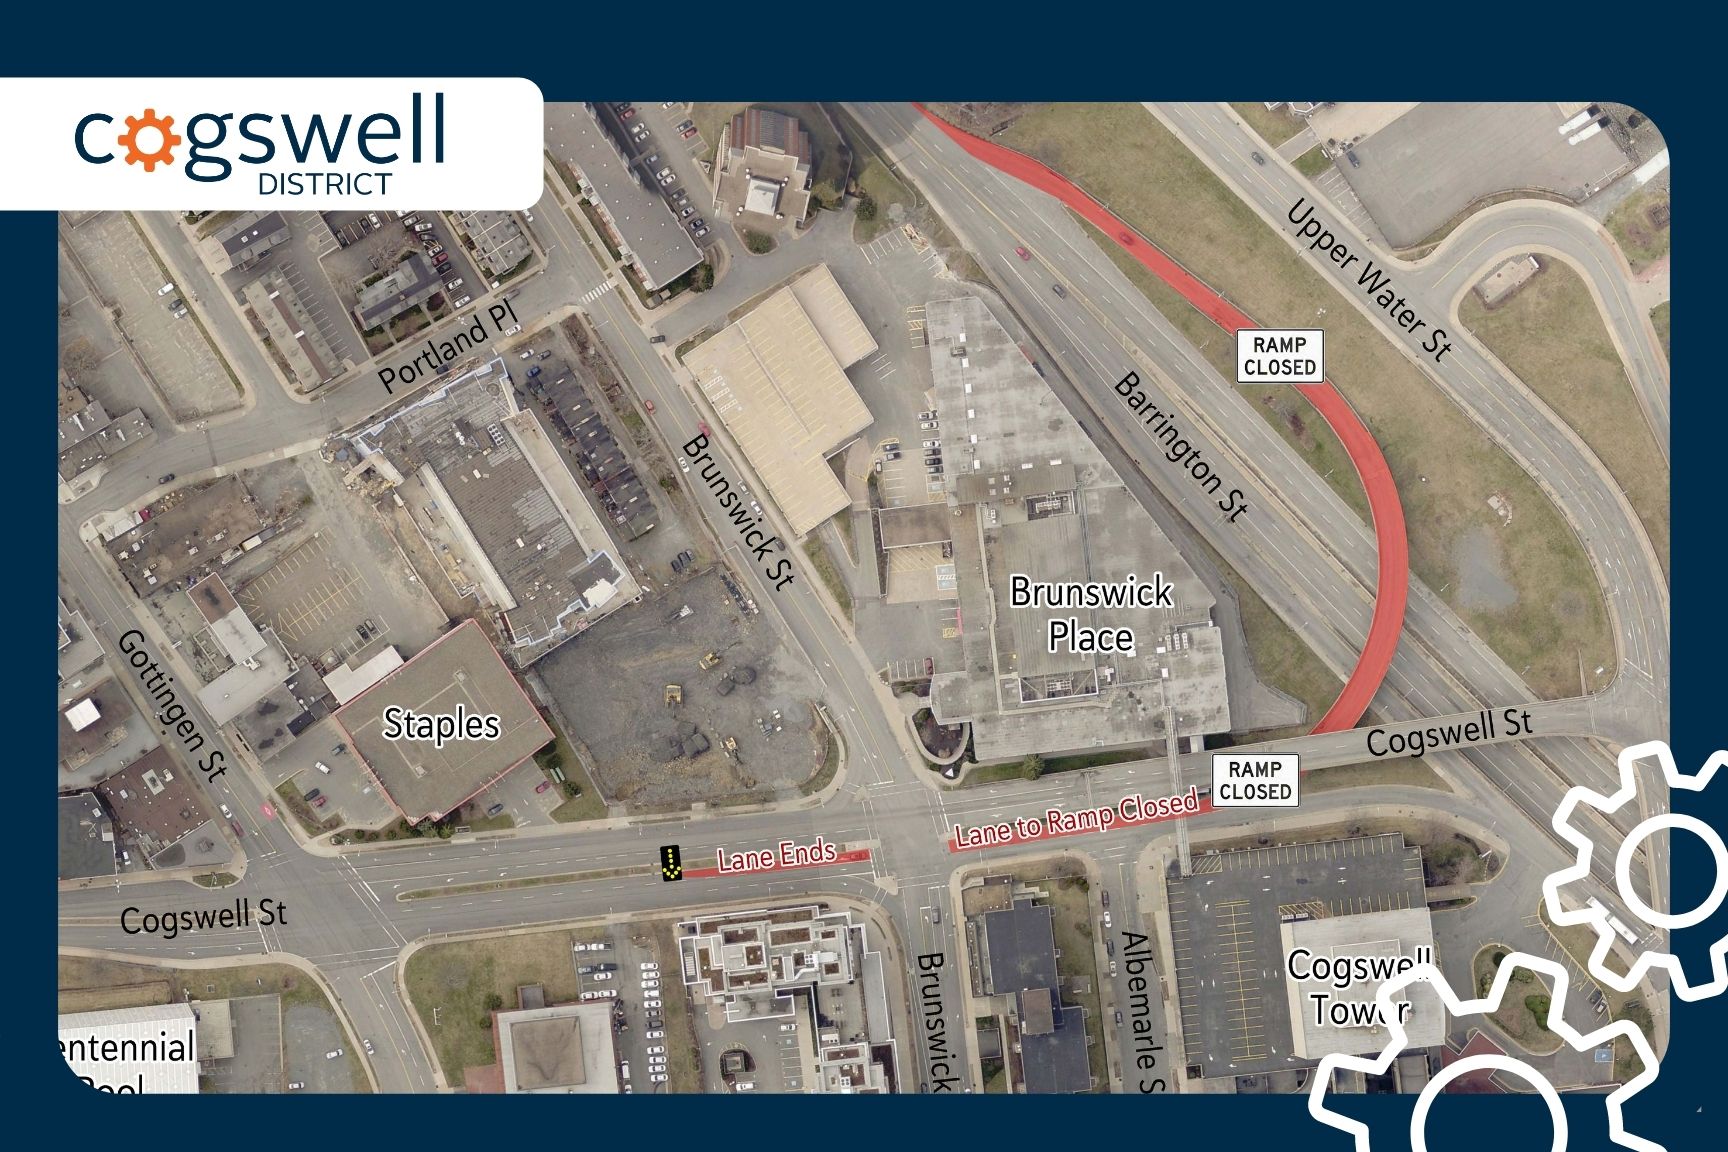 A map showing an aerial view of Cogswell District and the closed northbound ramp to Barrington St.